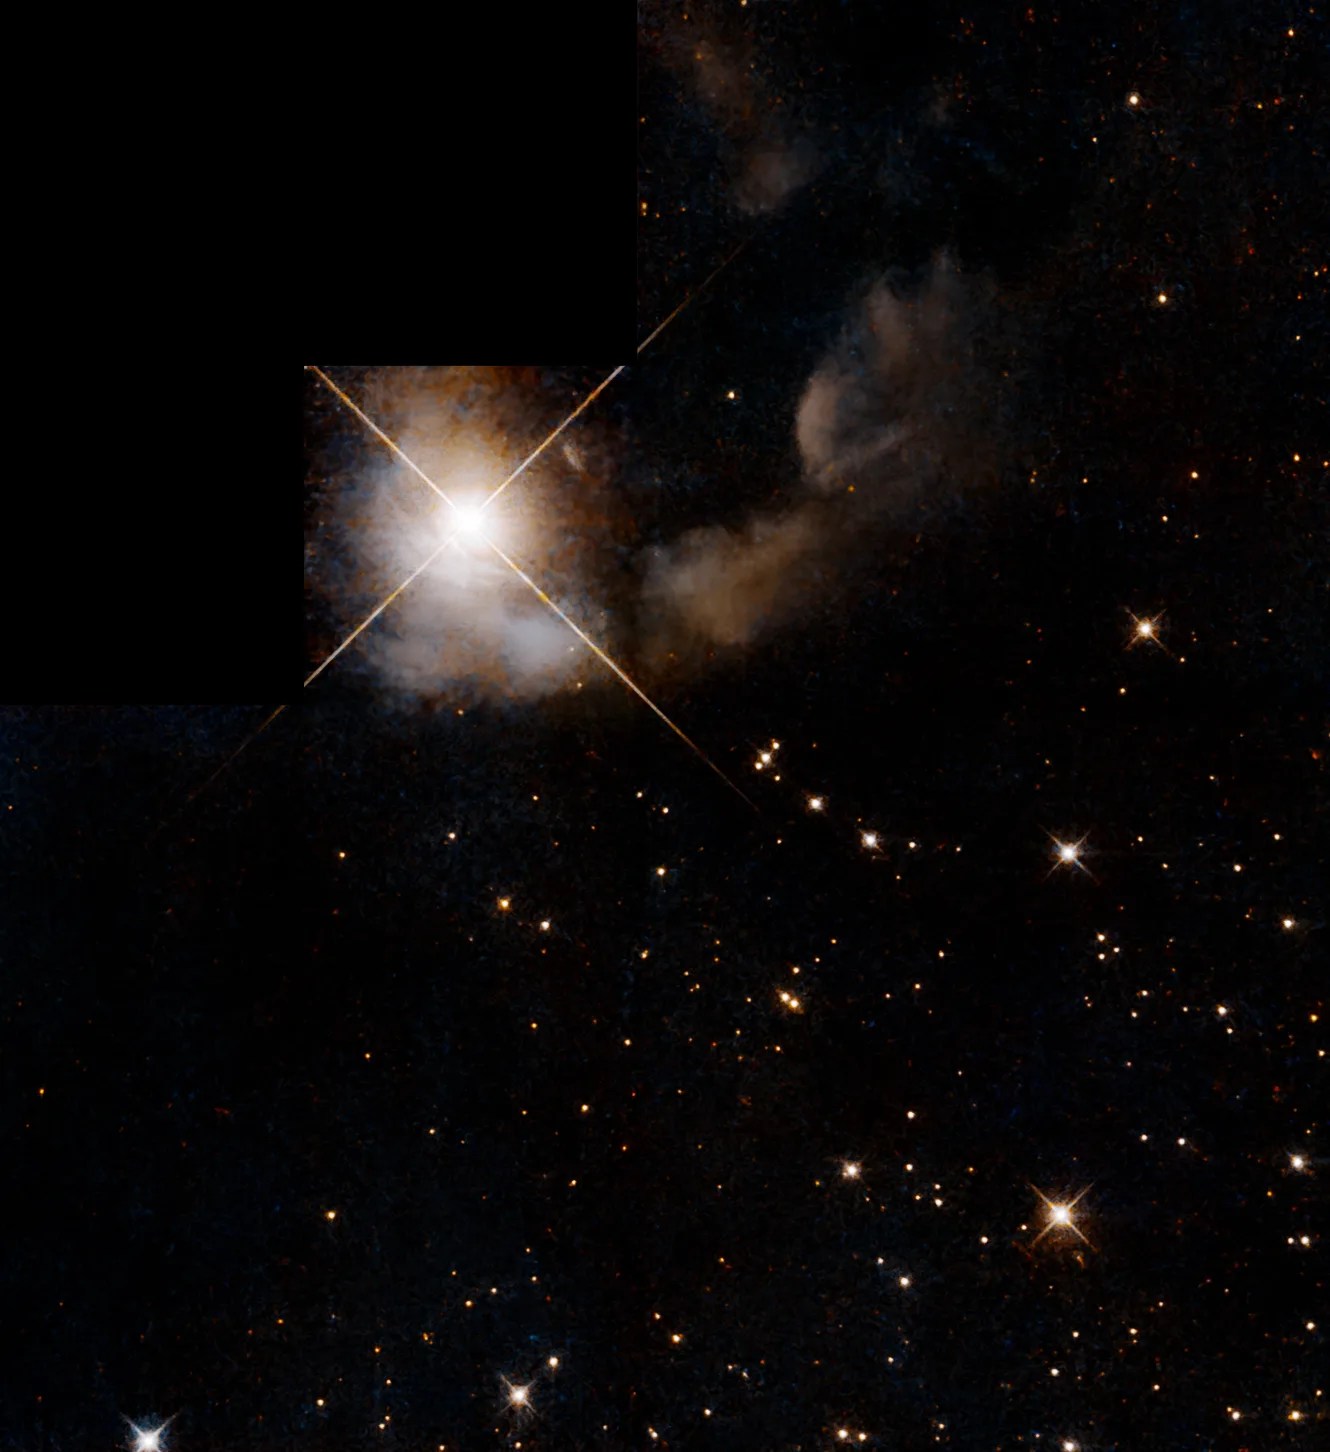 Large bright star at the top left of the image, surrounded by dark dust and gas. Stars pepper the image in the bottom right.